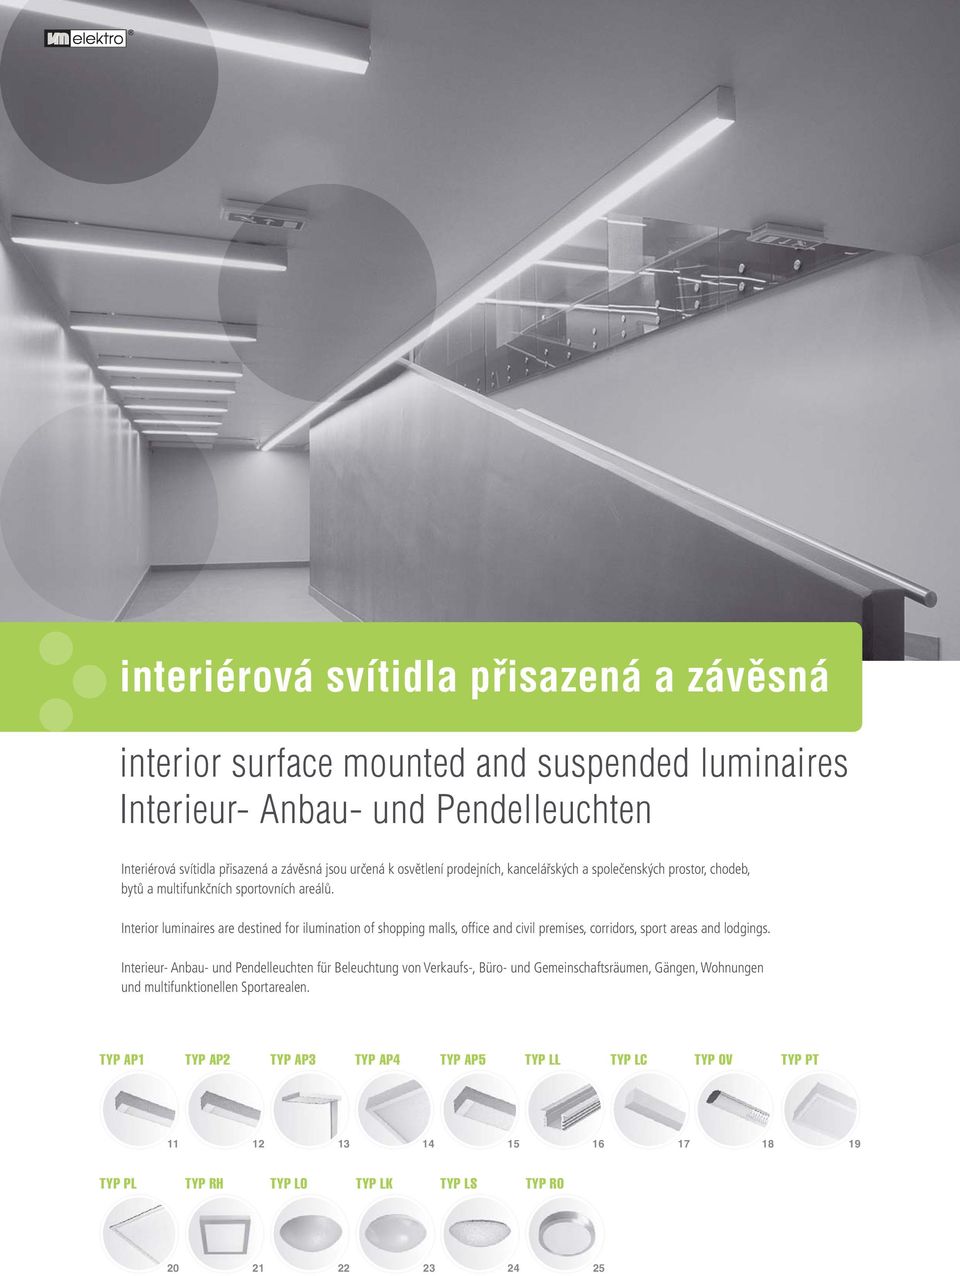 Interior luminaires are destined for ilumination of shopping malls, office and civil premises, corridors, sport areas and lodgings.